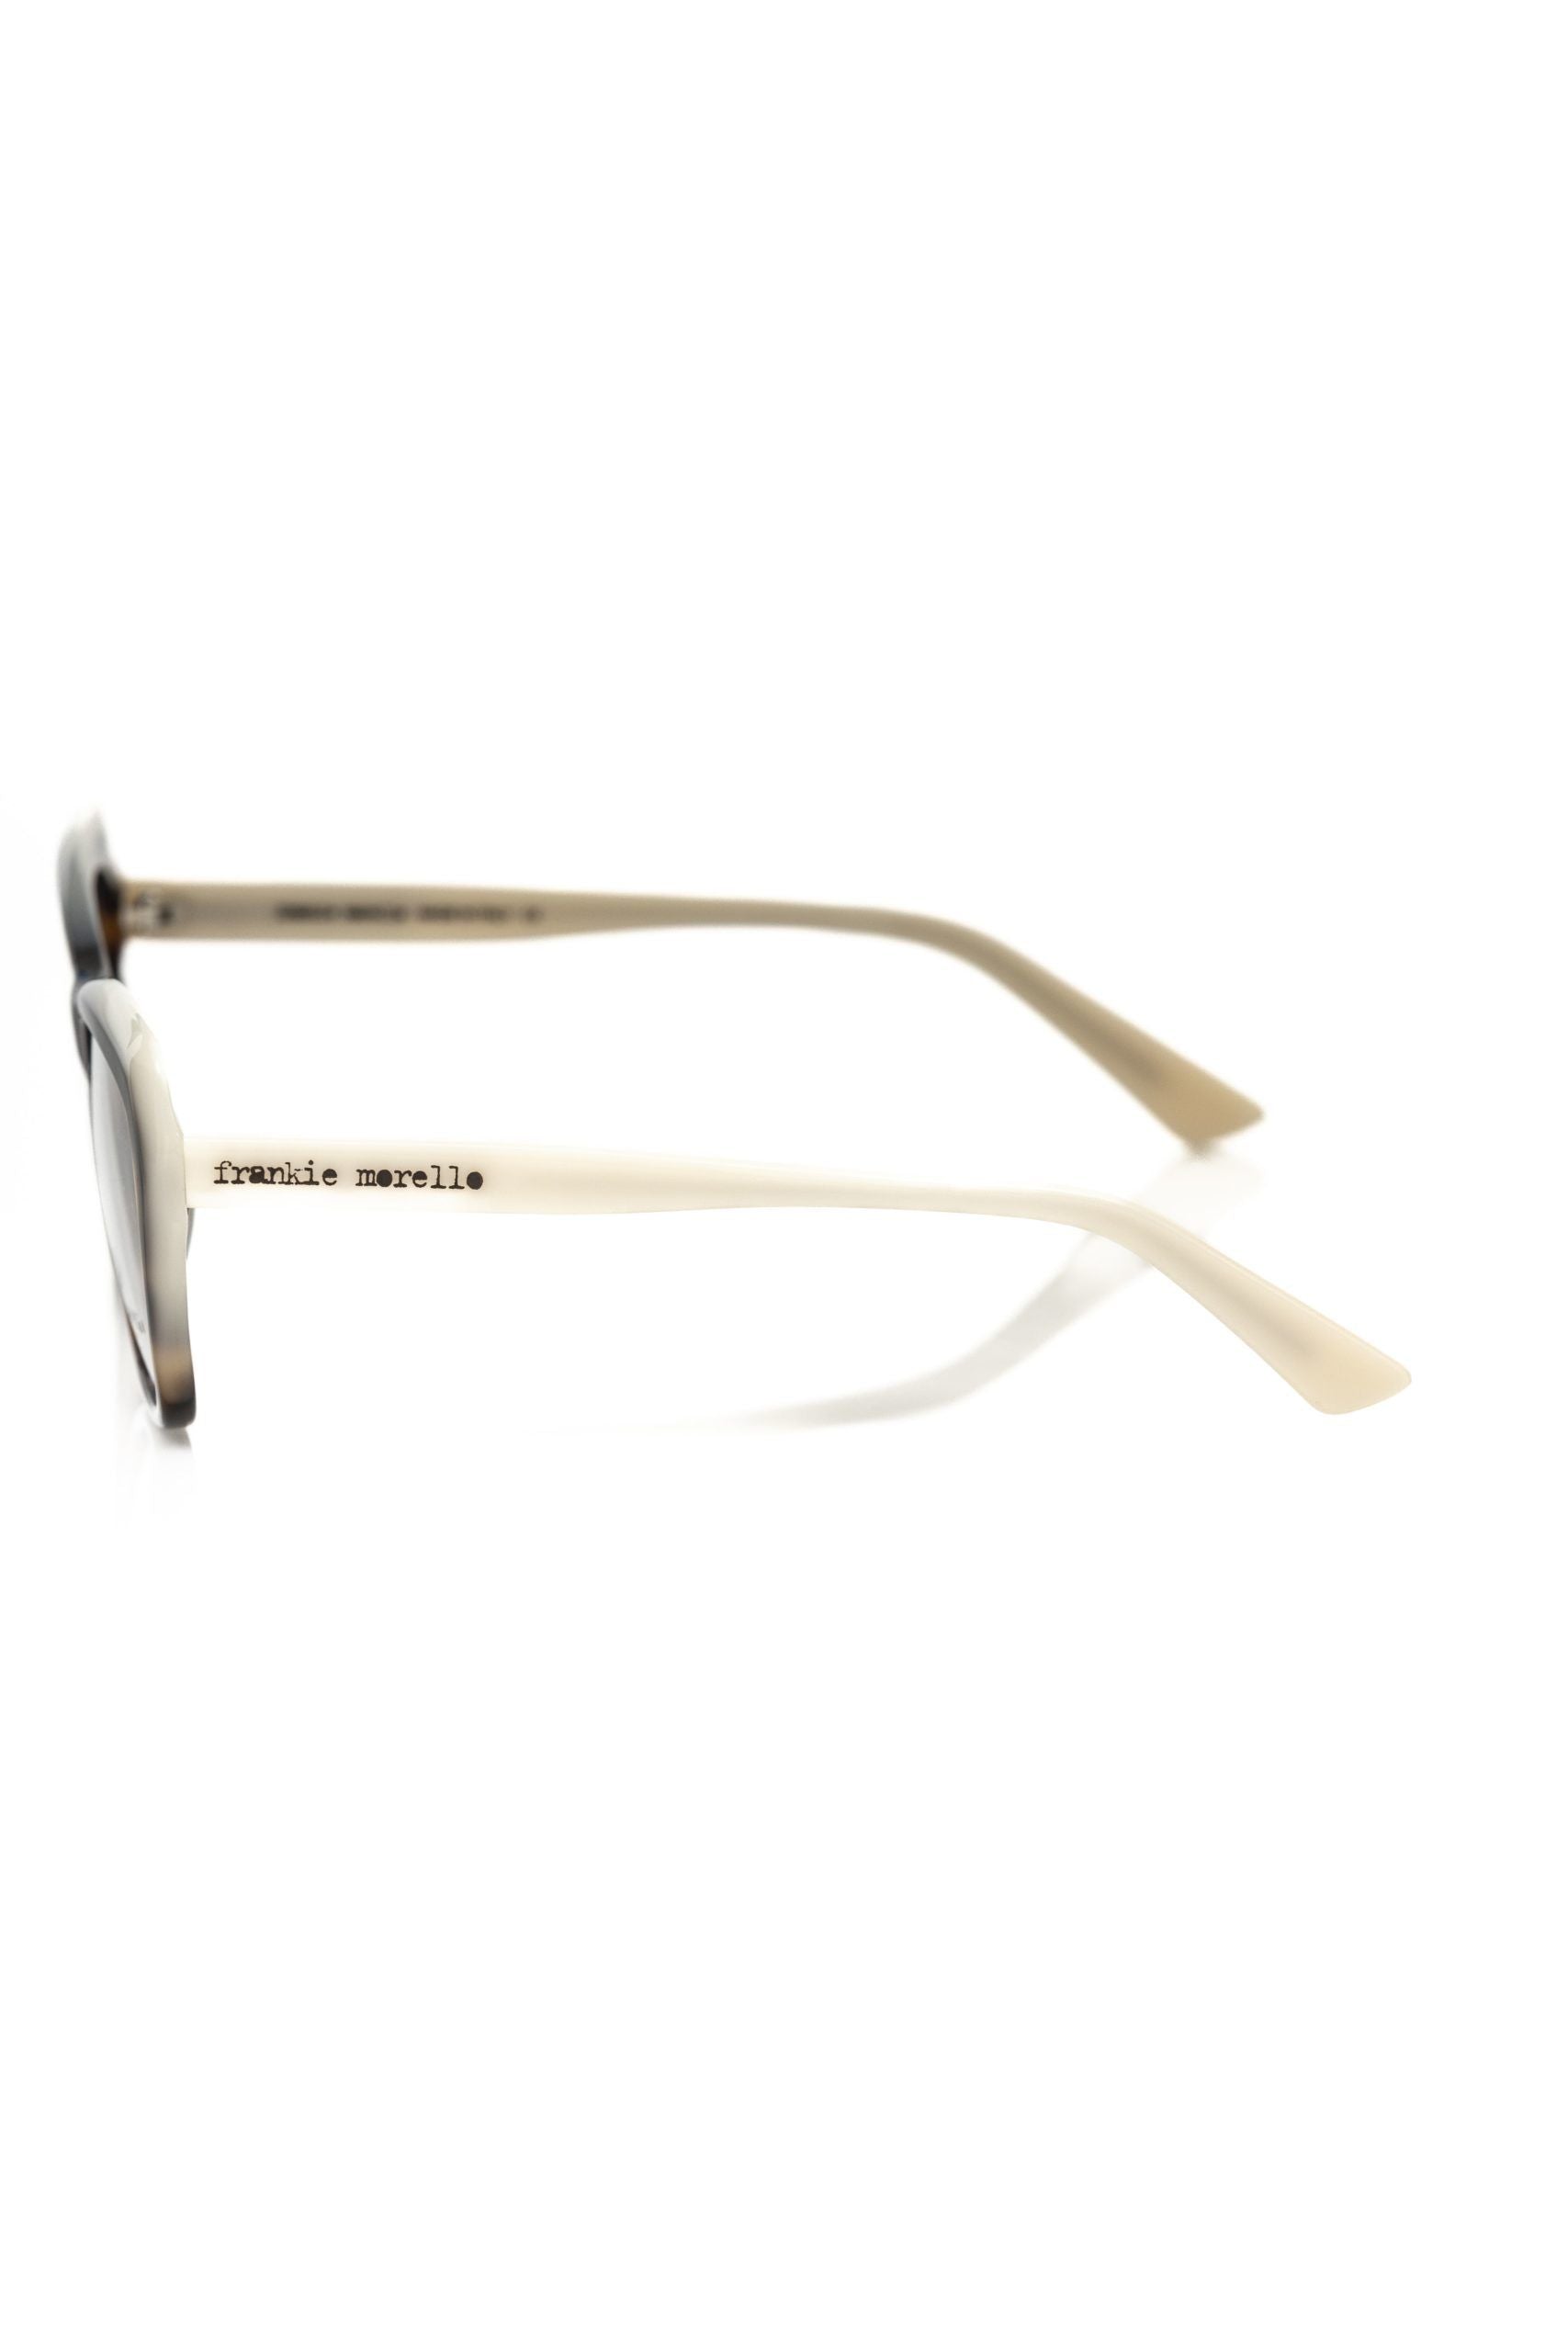 Frankie Morello FRMO-22108 Multicolor Acetate Frames - Designed by Frankie Morello Available to Buy at a Discounted Price on Moon Behind The Hill Online Designer Discount Store